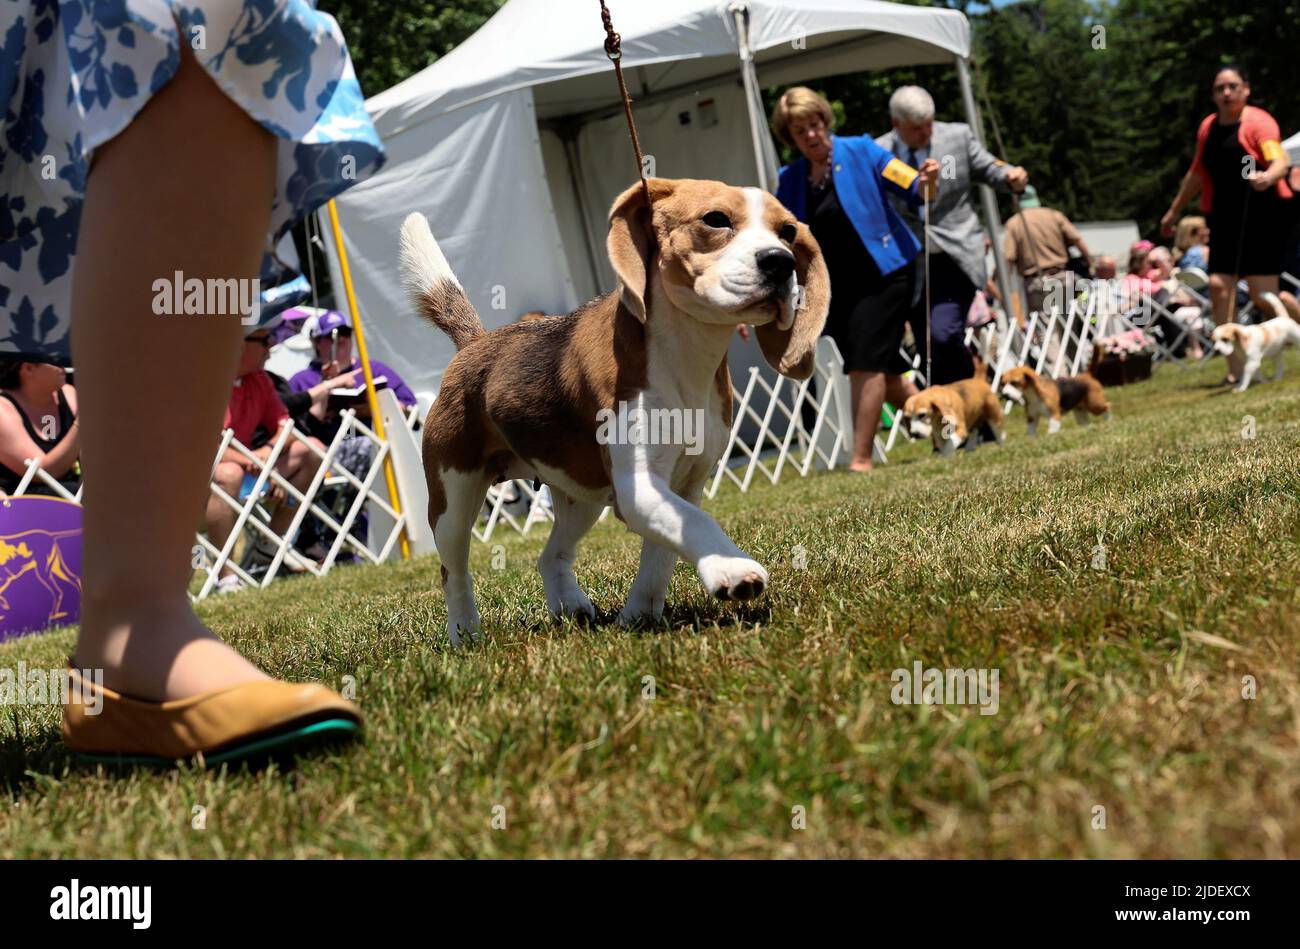 A 13-inch Beagle runs in the ring during breed judging at the 146th Westminster Kennel Club Dog Show at the Lyndhurst Estate in Tarrytown, New York, U.S., June 20, 2022. REUTERS/Mike Segar Stock Photo